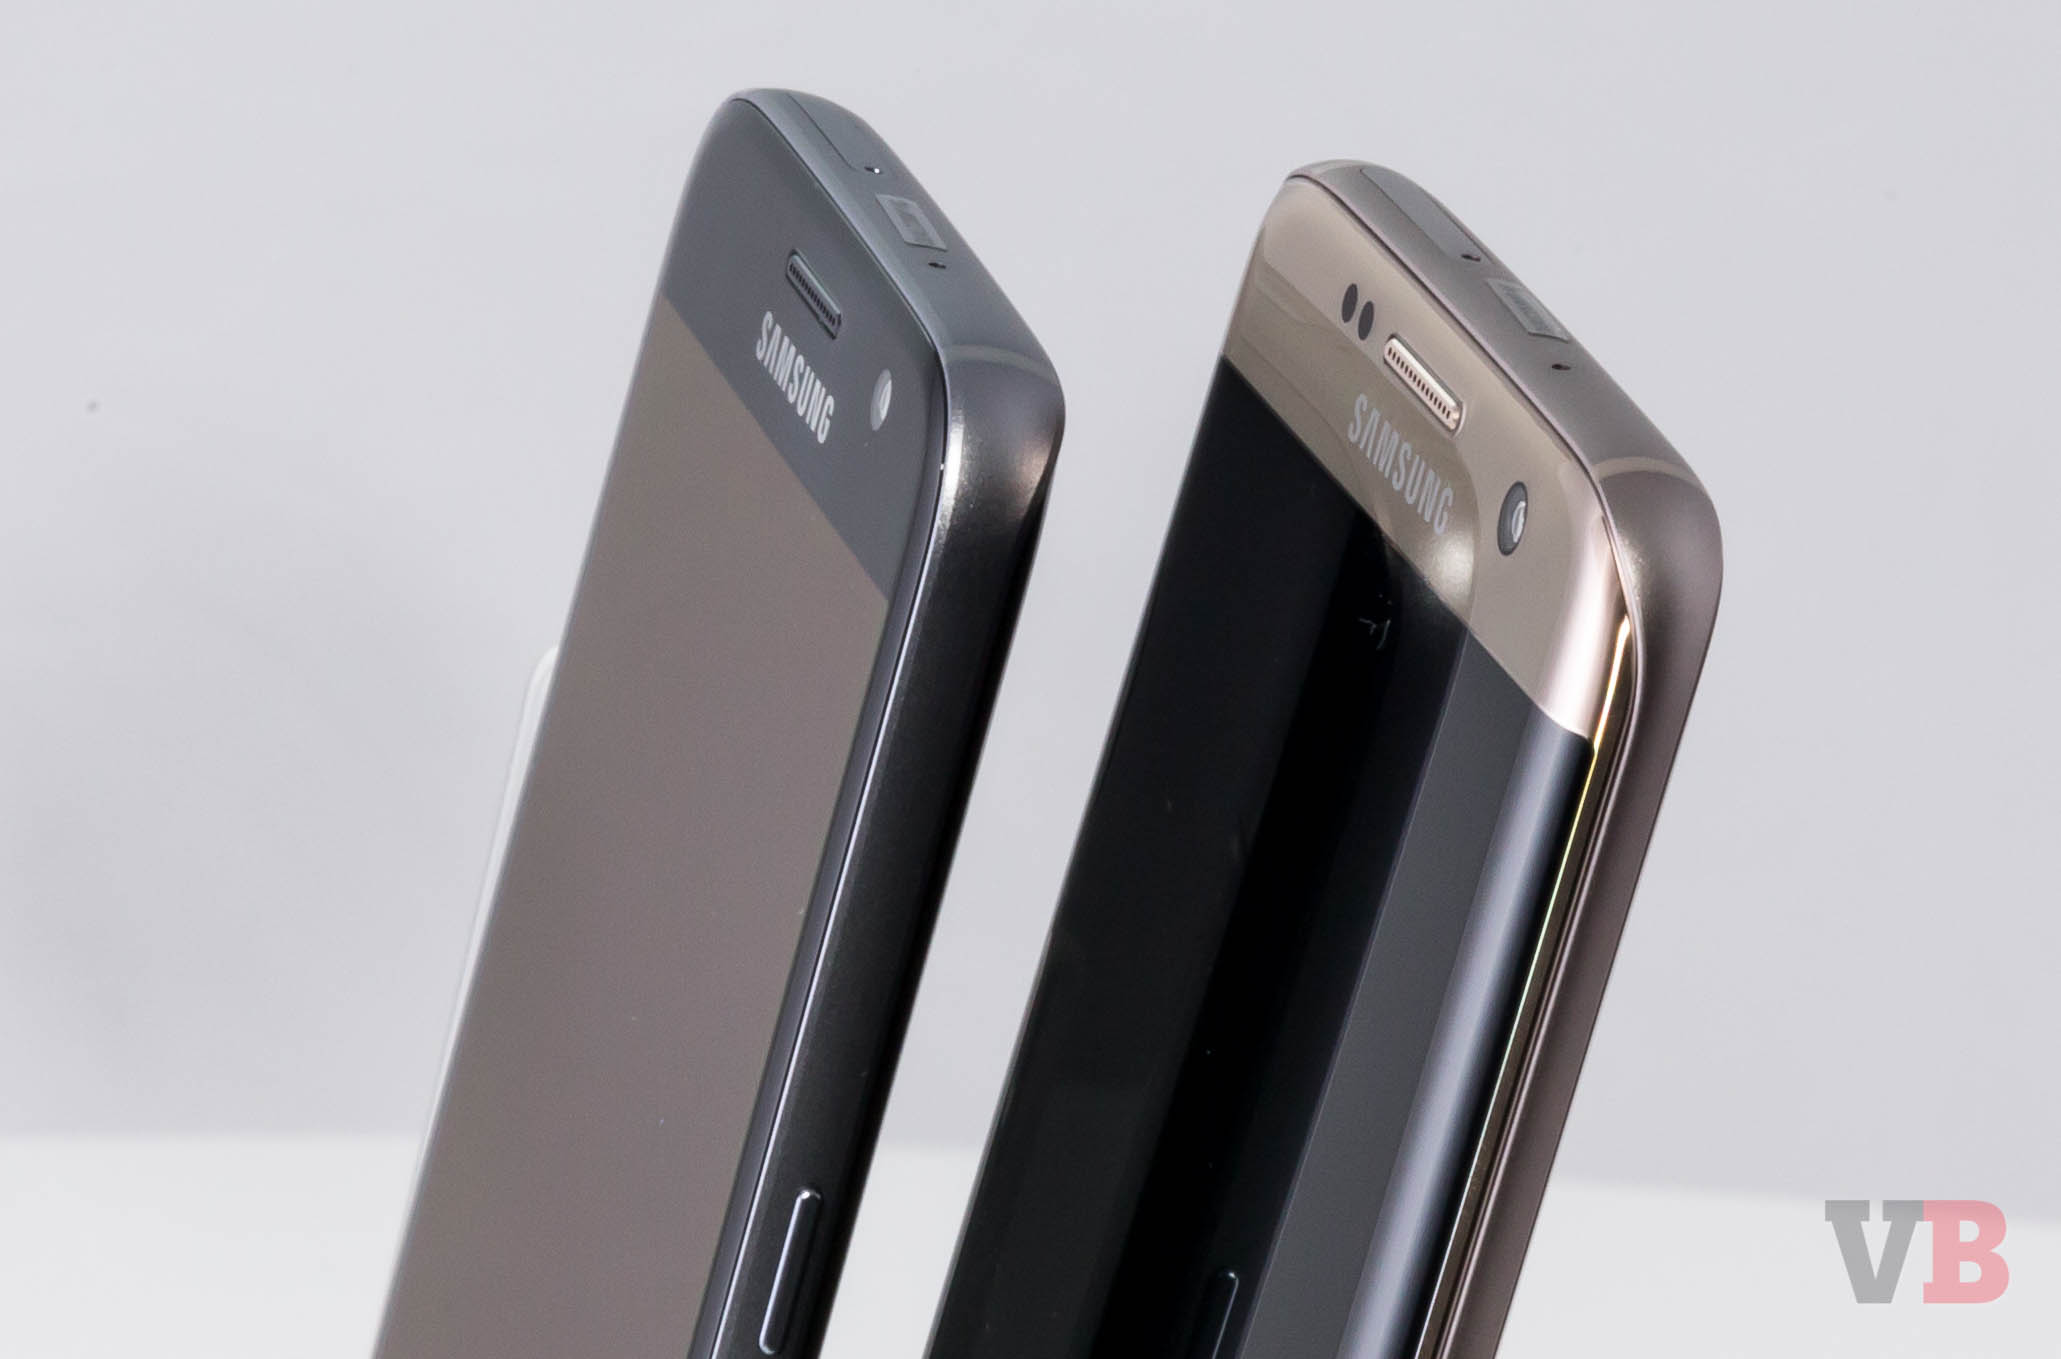 Close up of the Samsung Galaxy S7 and S7 edge.